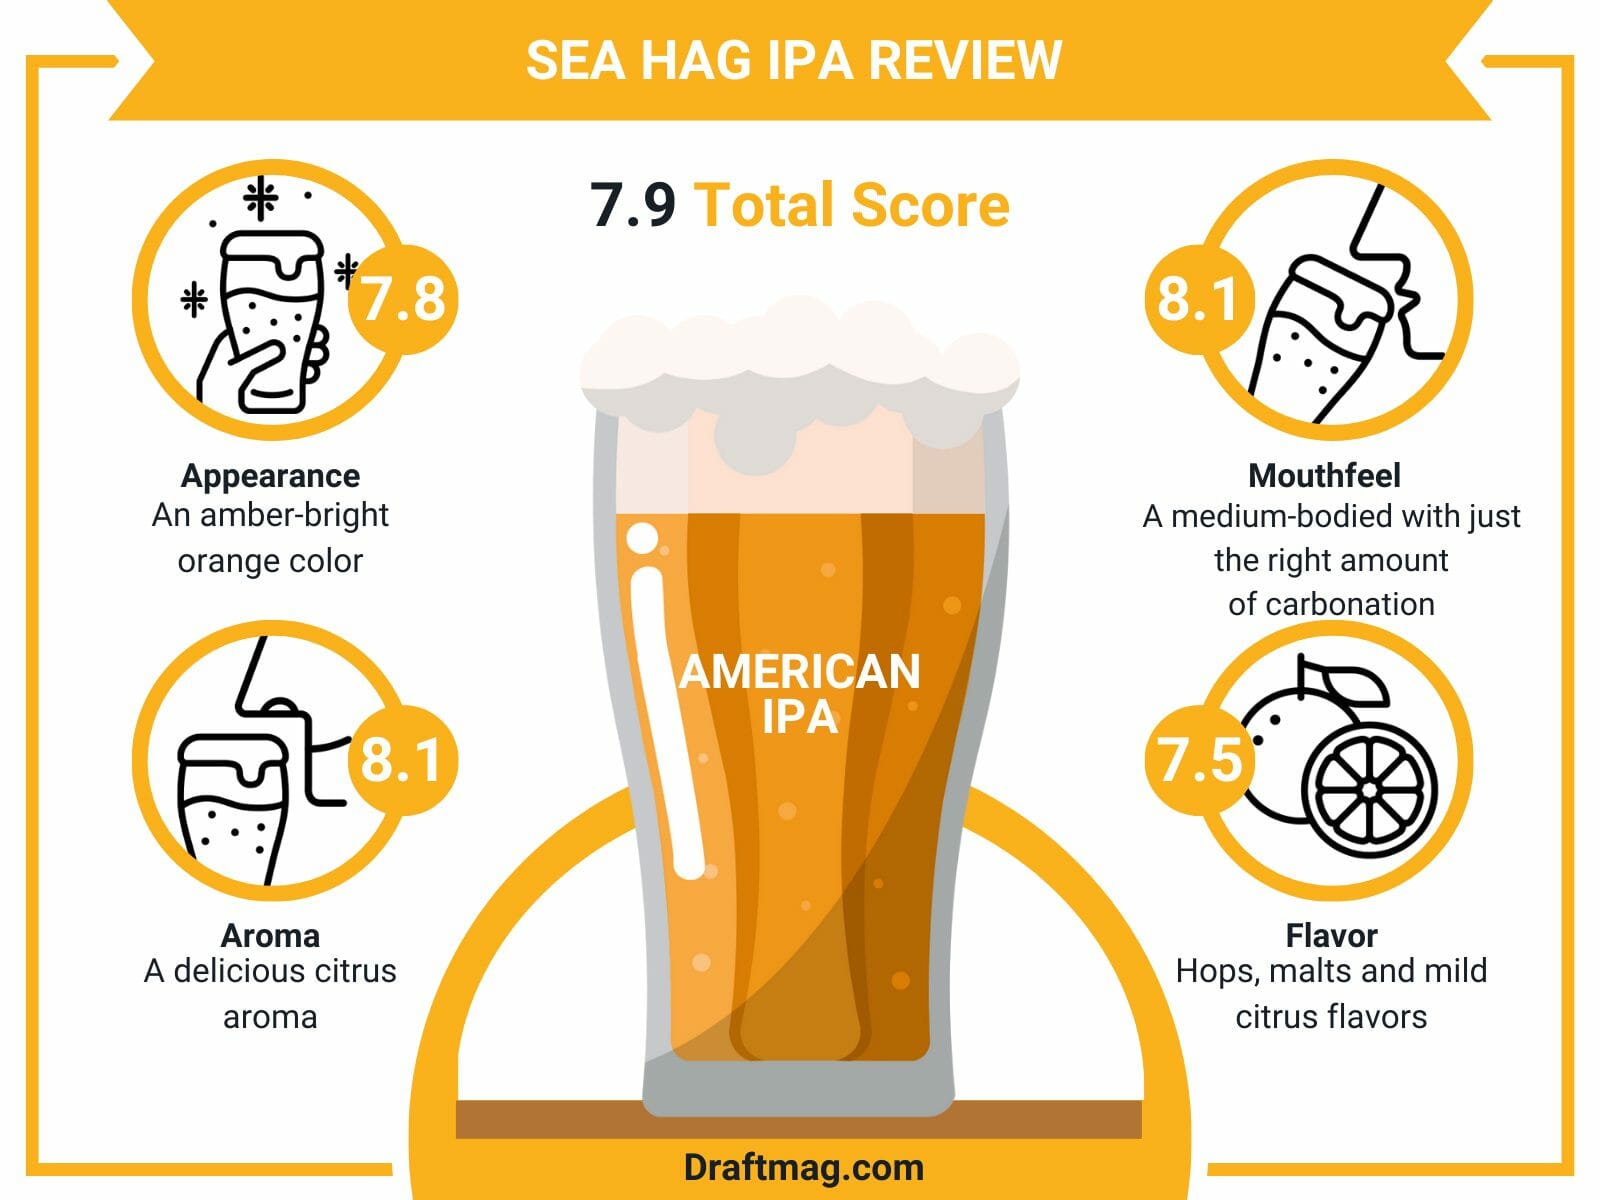 Sea hag ipa review infographic